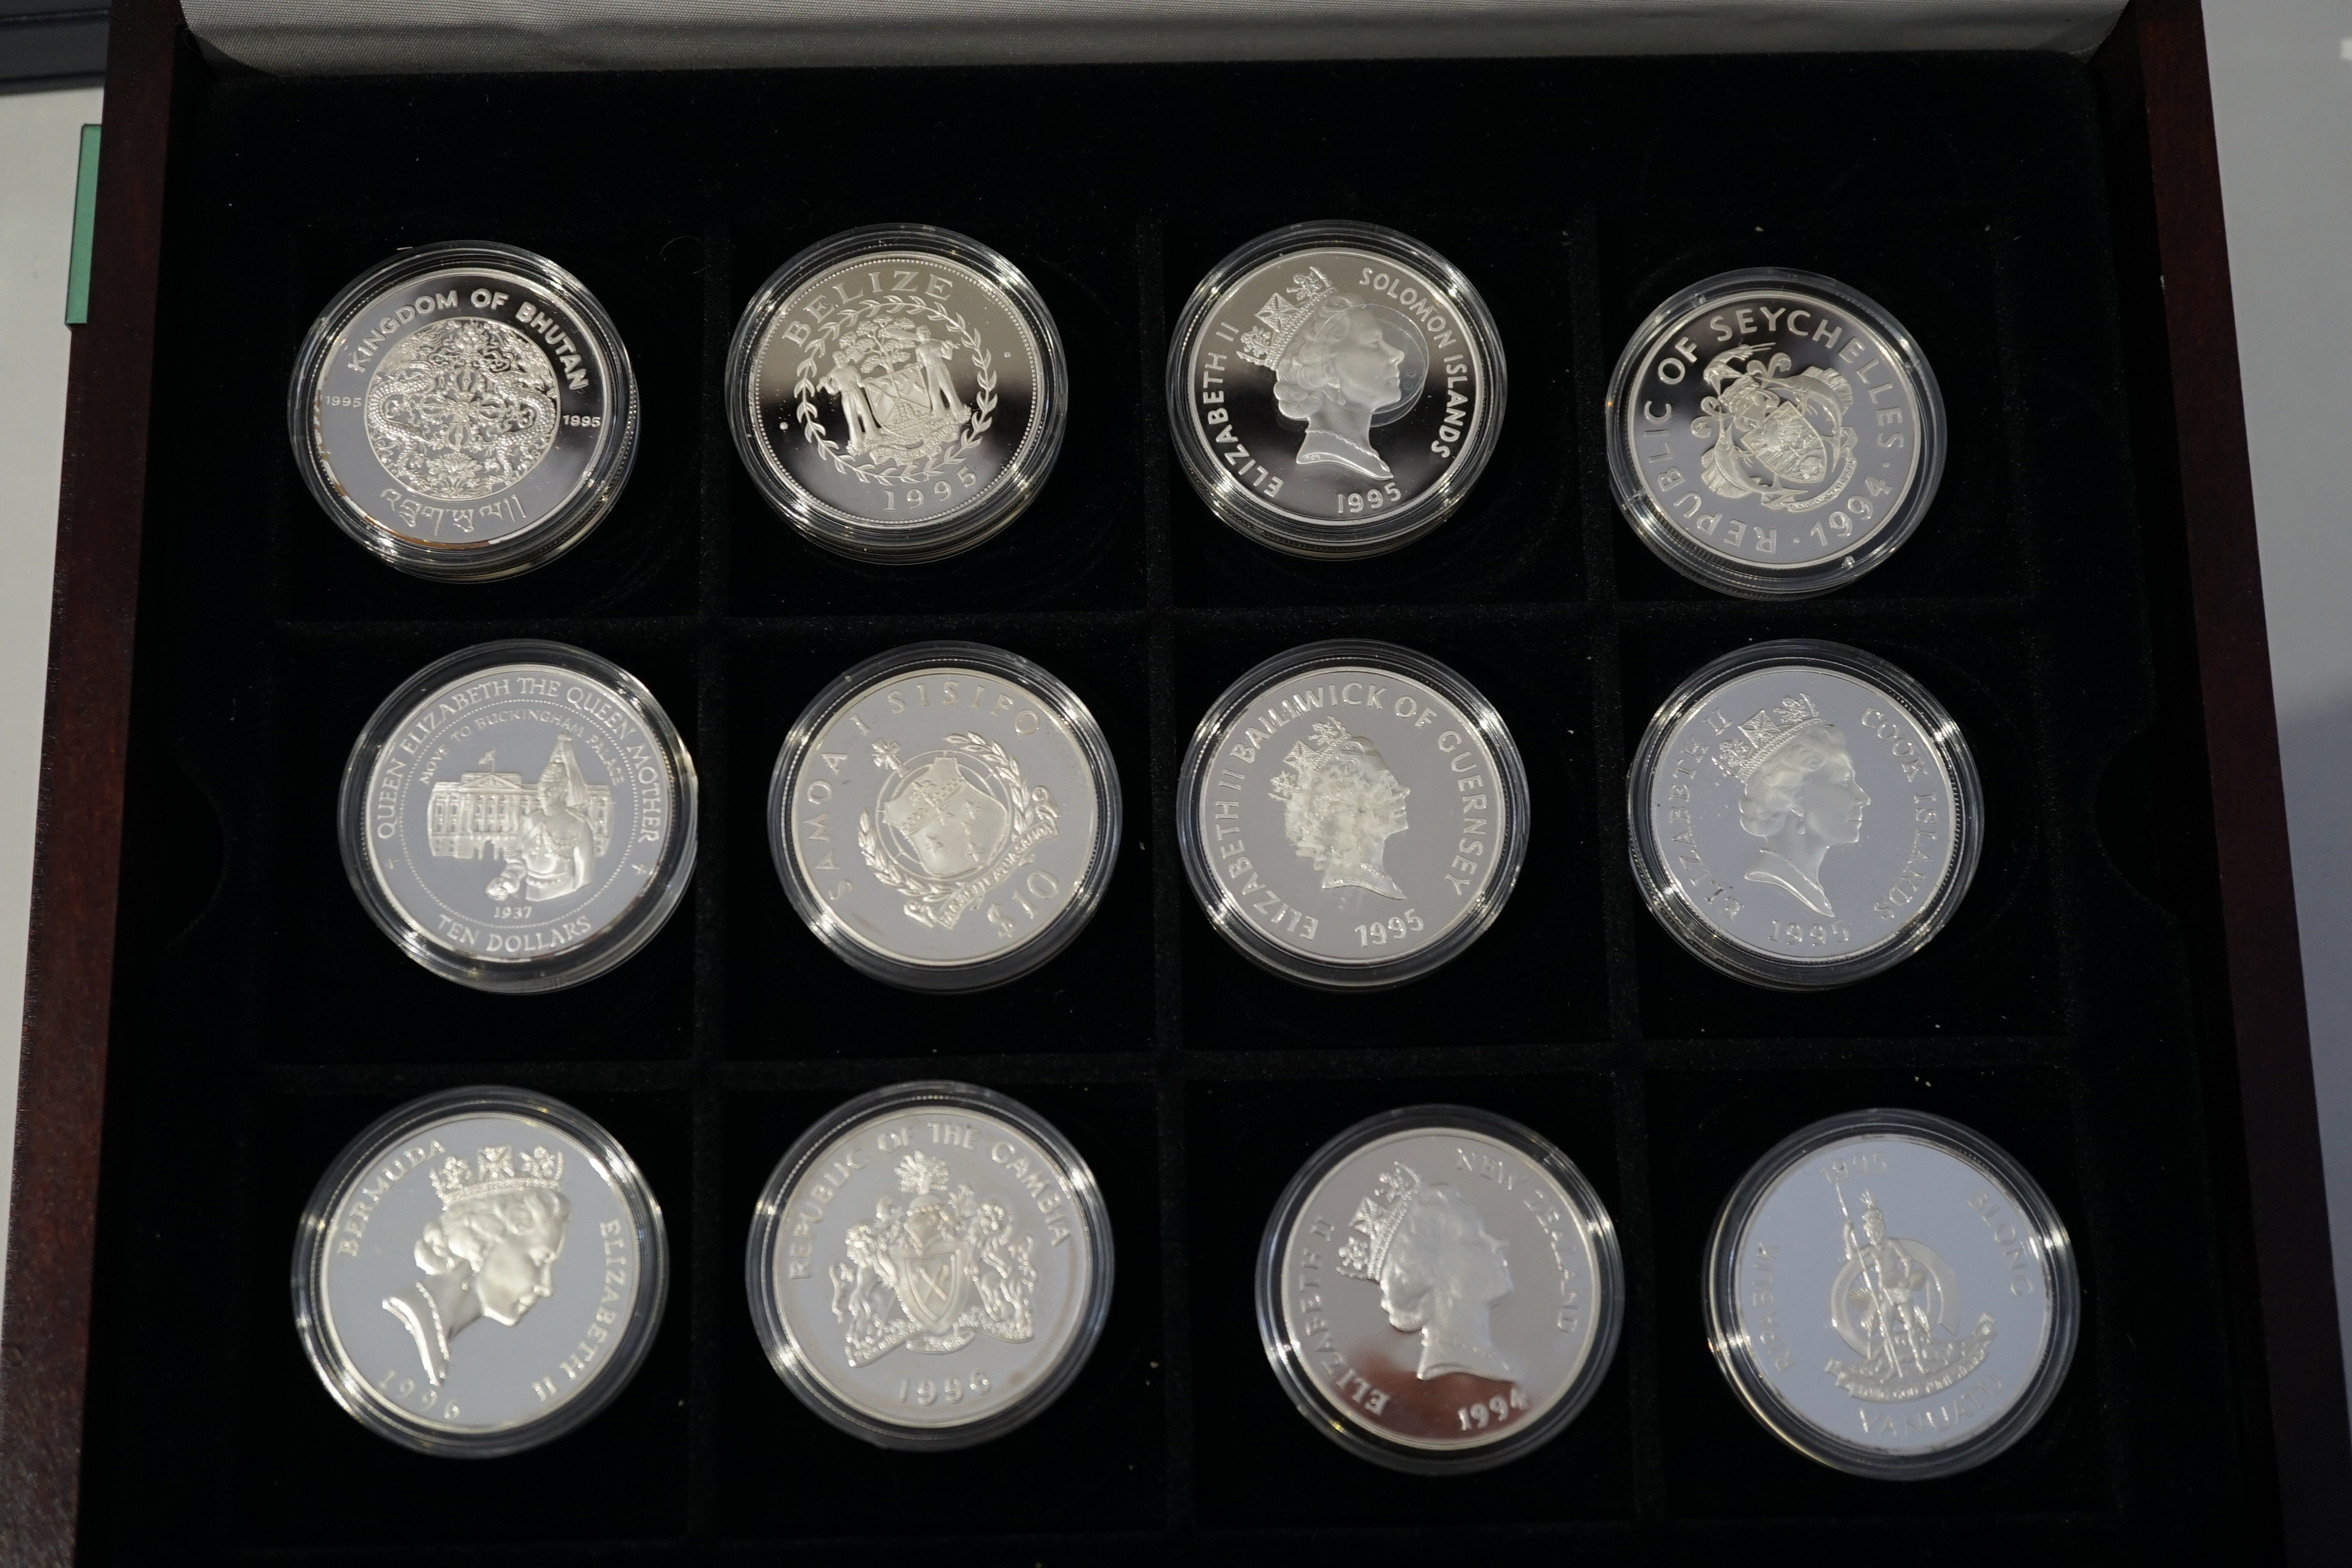 British and Commonwealth commemorative coins, MDM Crown collection HM Queen Elizabeth the Queen Mother, 40 proof silver coins, 28.28 to 41.47g, two cases with album of certificates